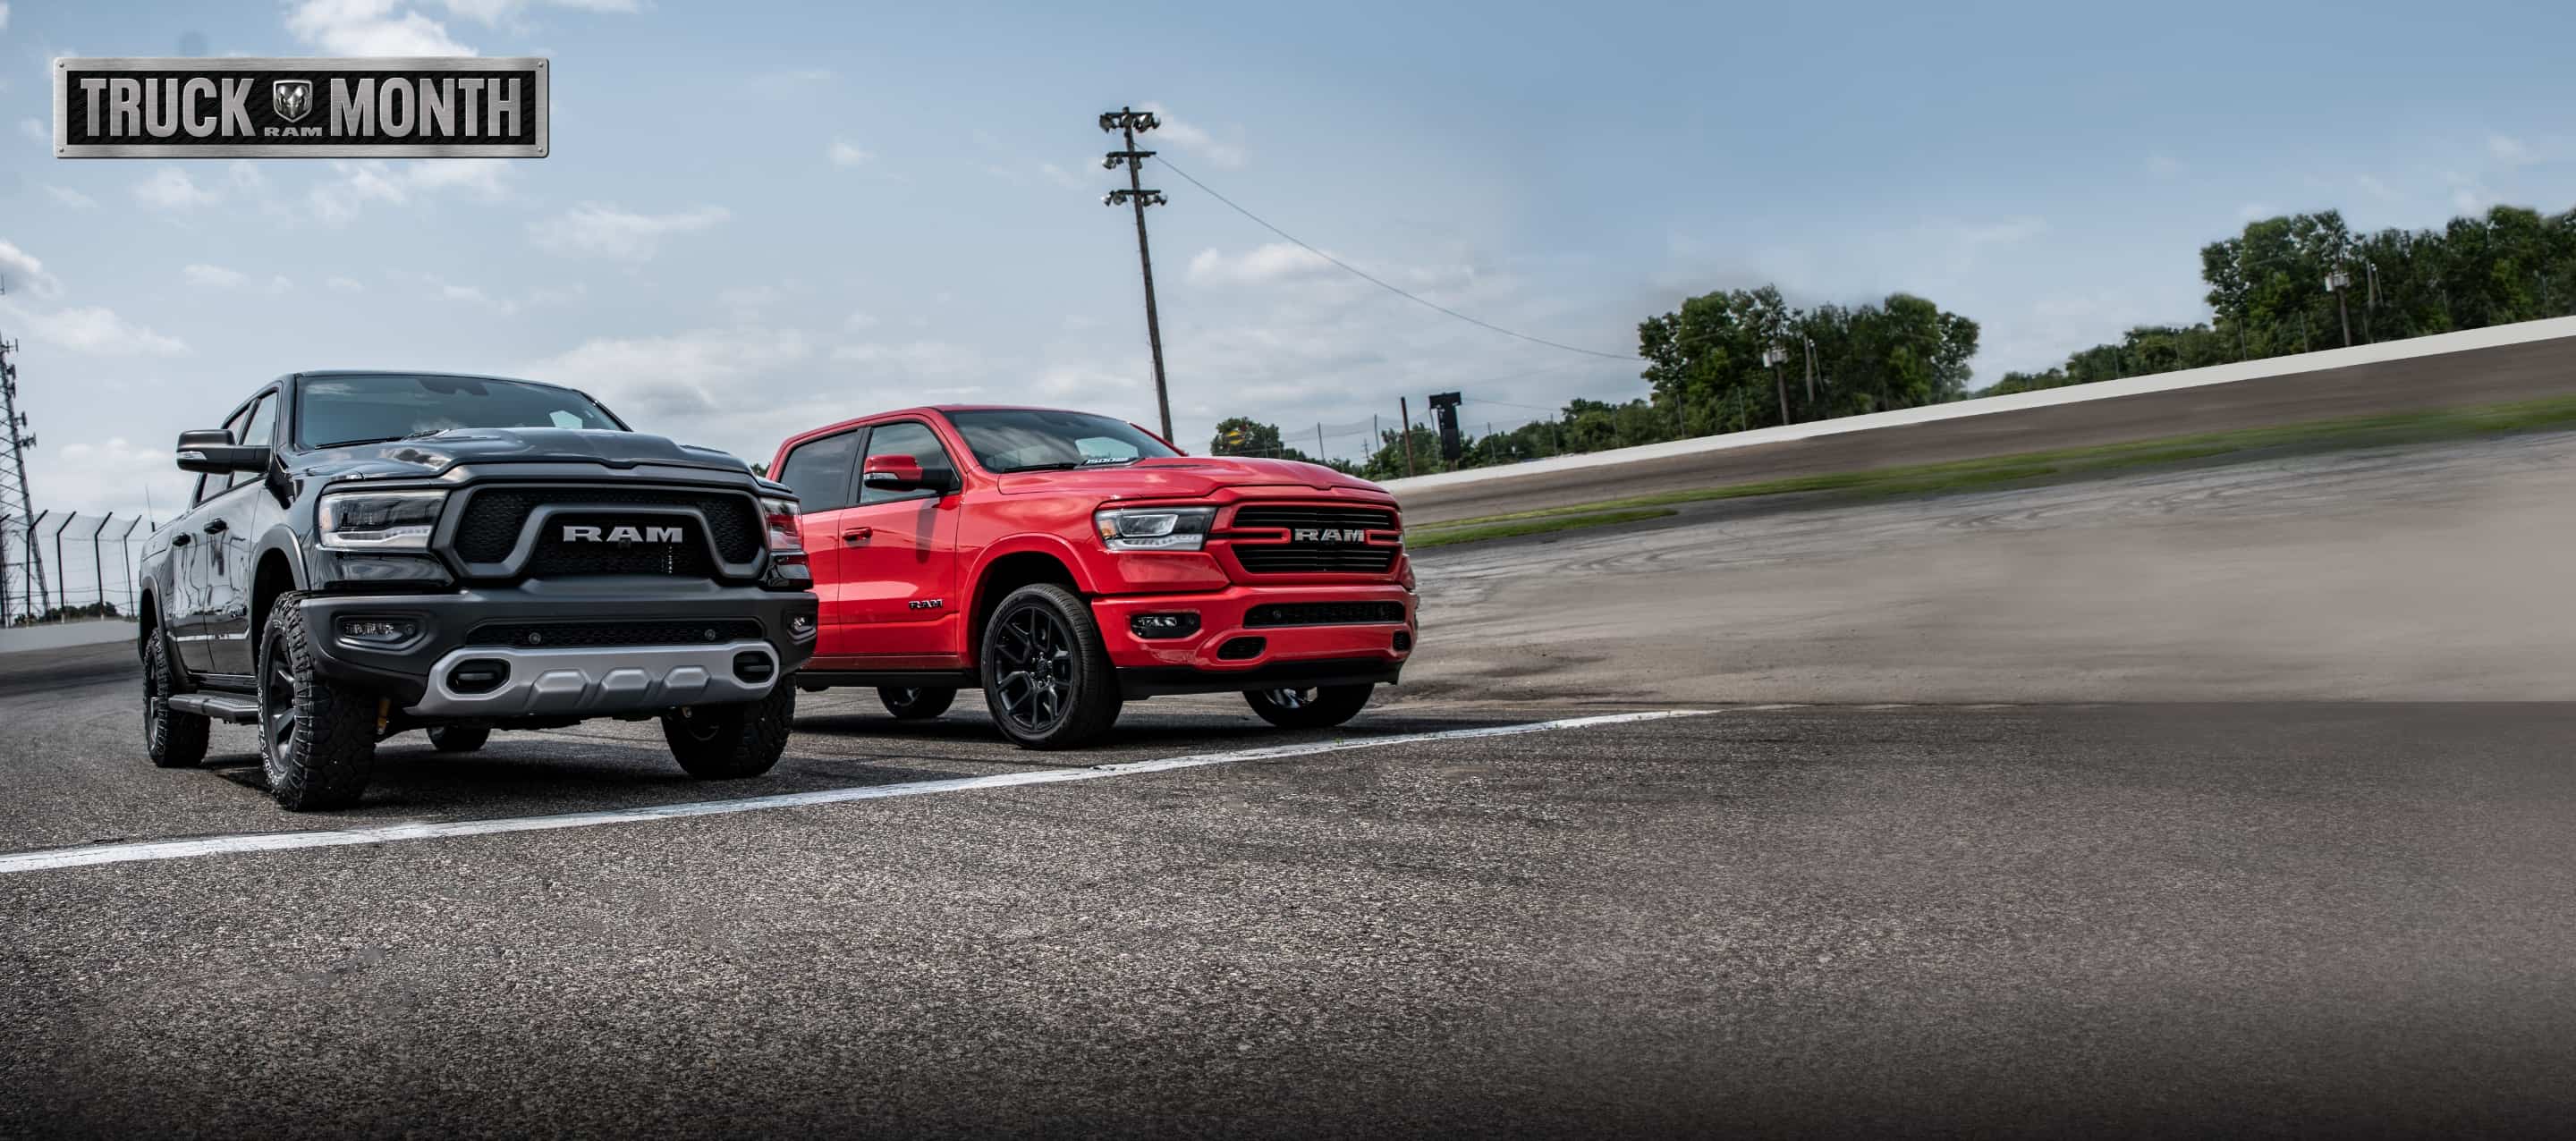  A black 2022 Ram 1500 Rebel and a red 2022 Ram 1500 Laramie at the starting line of a racetrack. The Ram Truck Month logo.